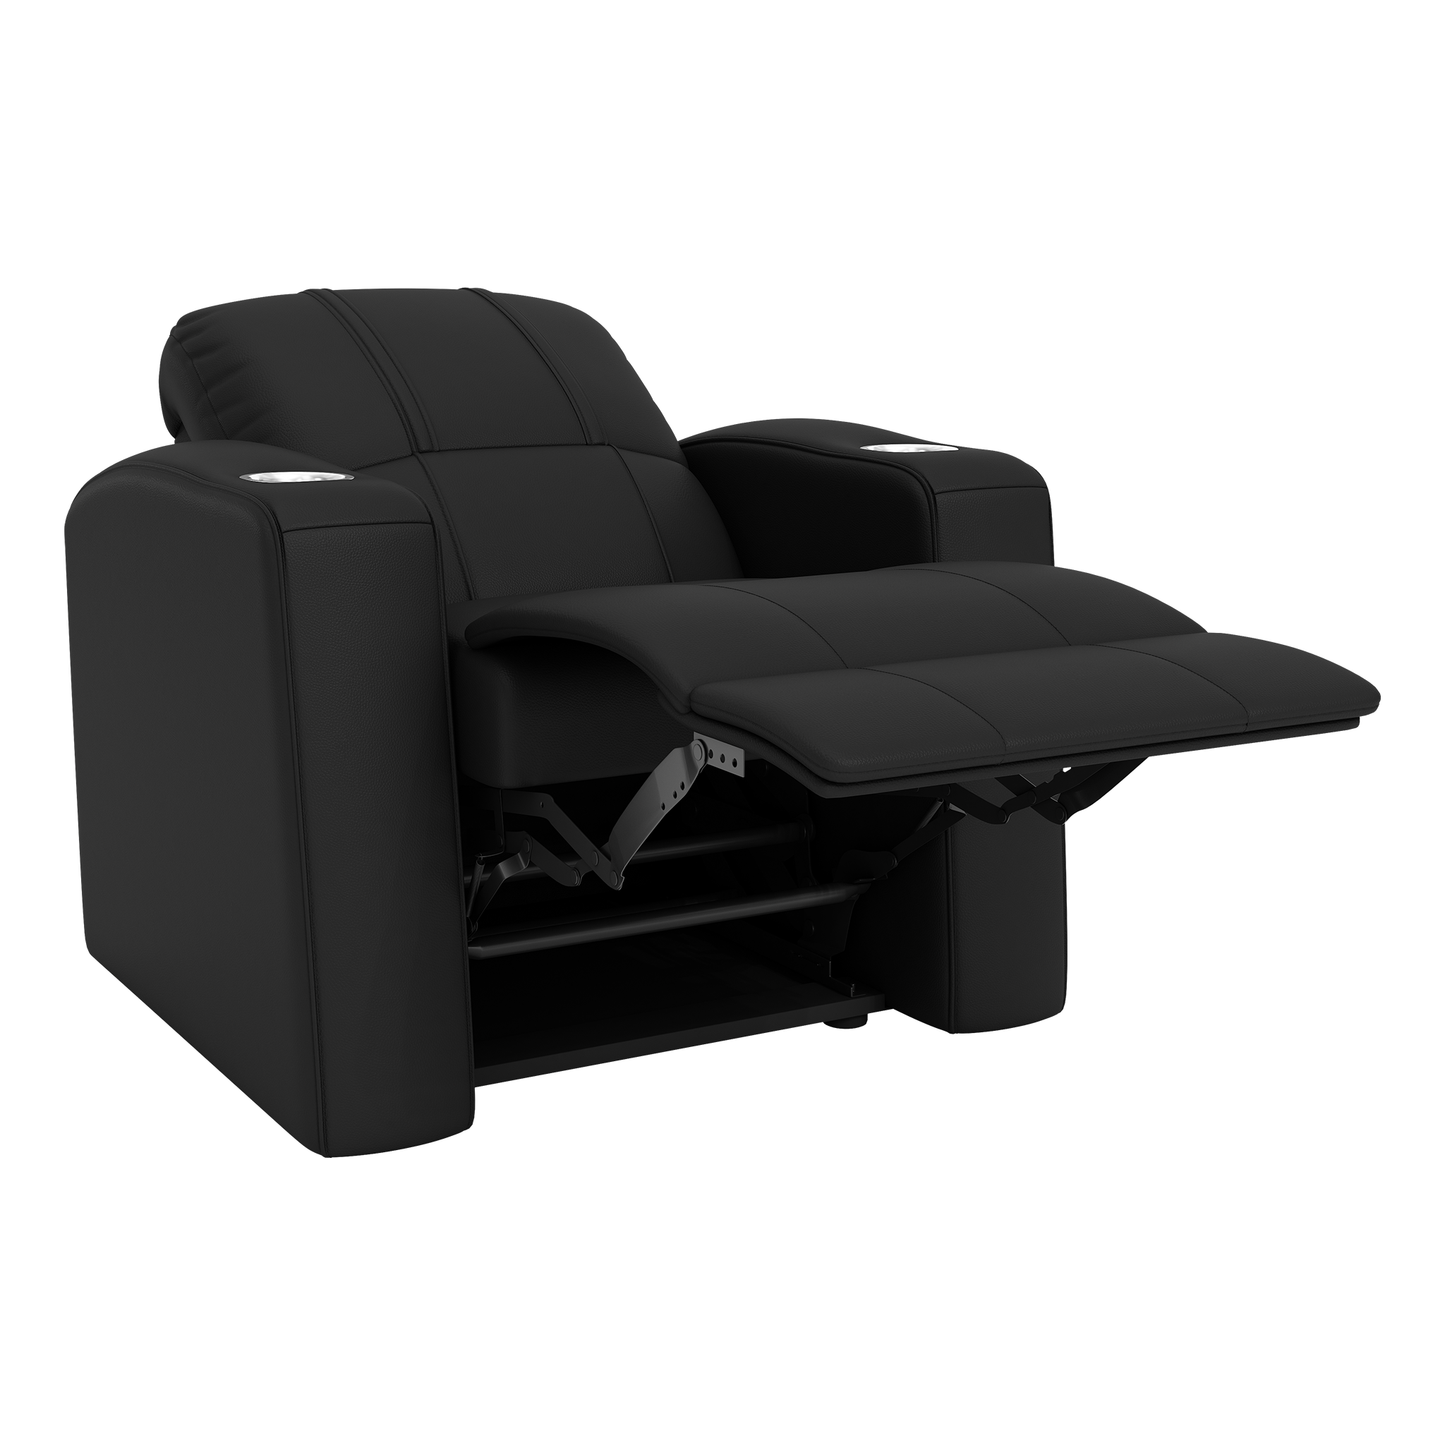 Relax Home Theater Recliner with Vanderbilt Commodores Alternate